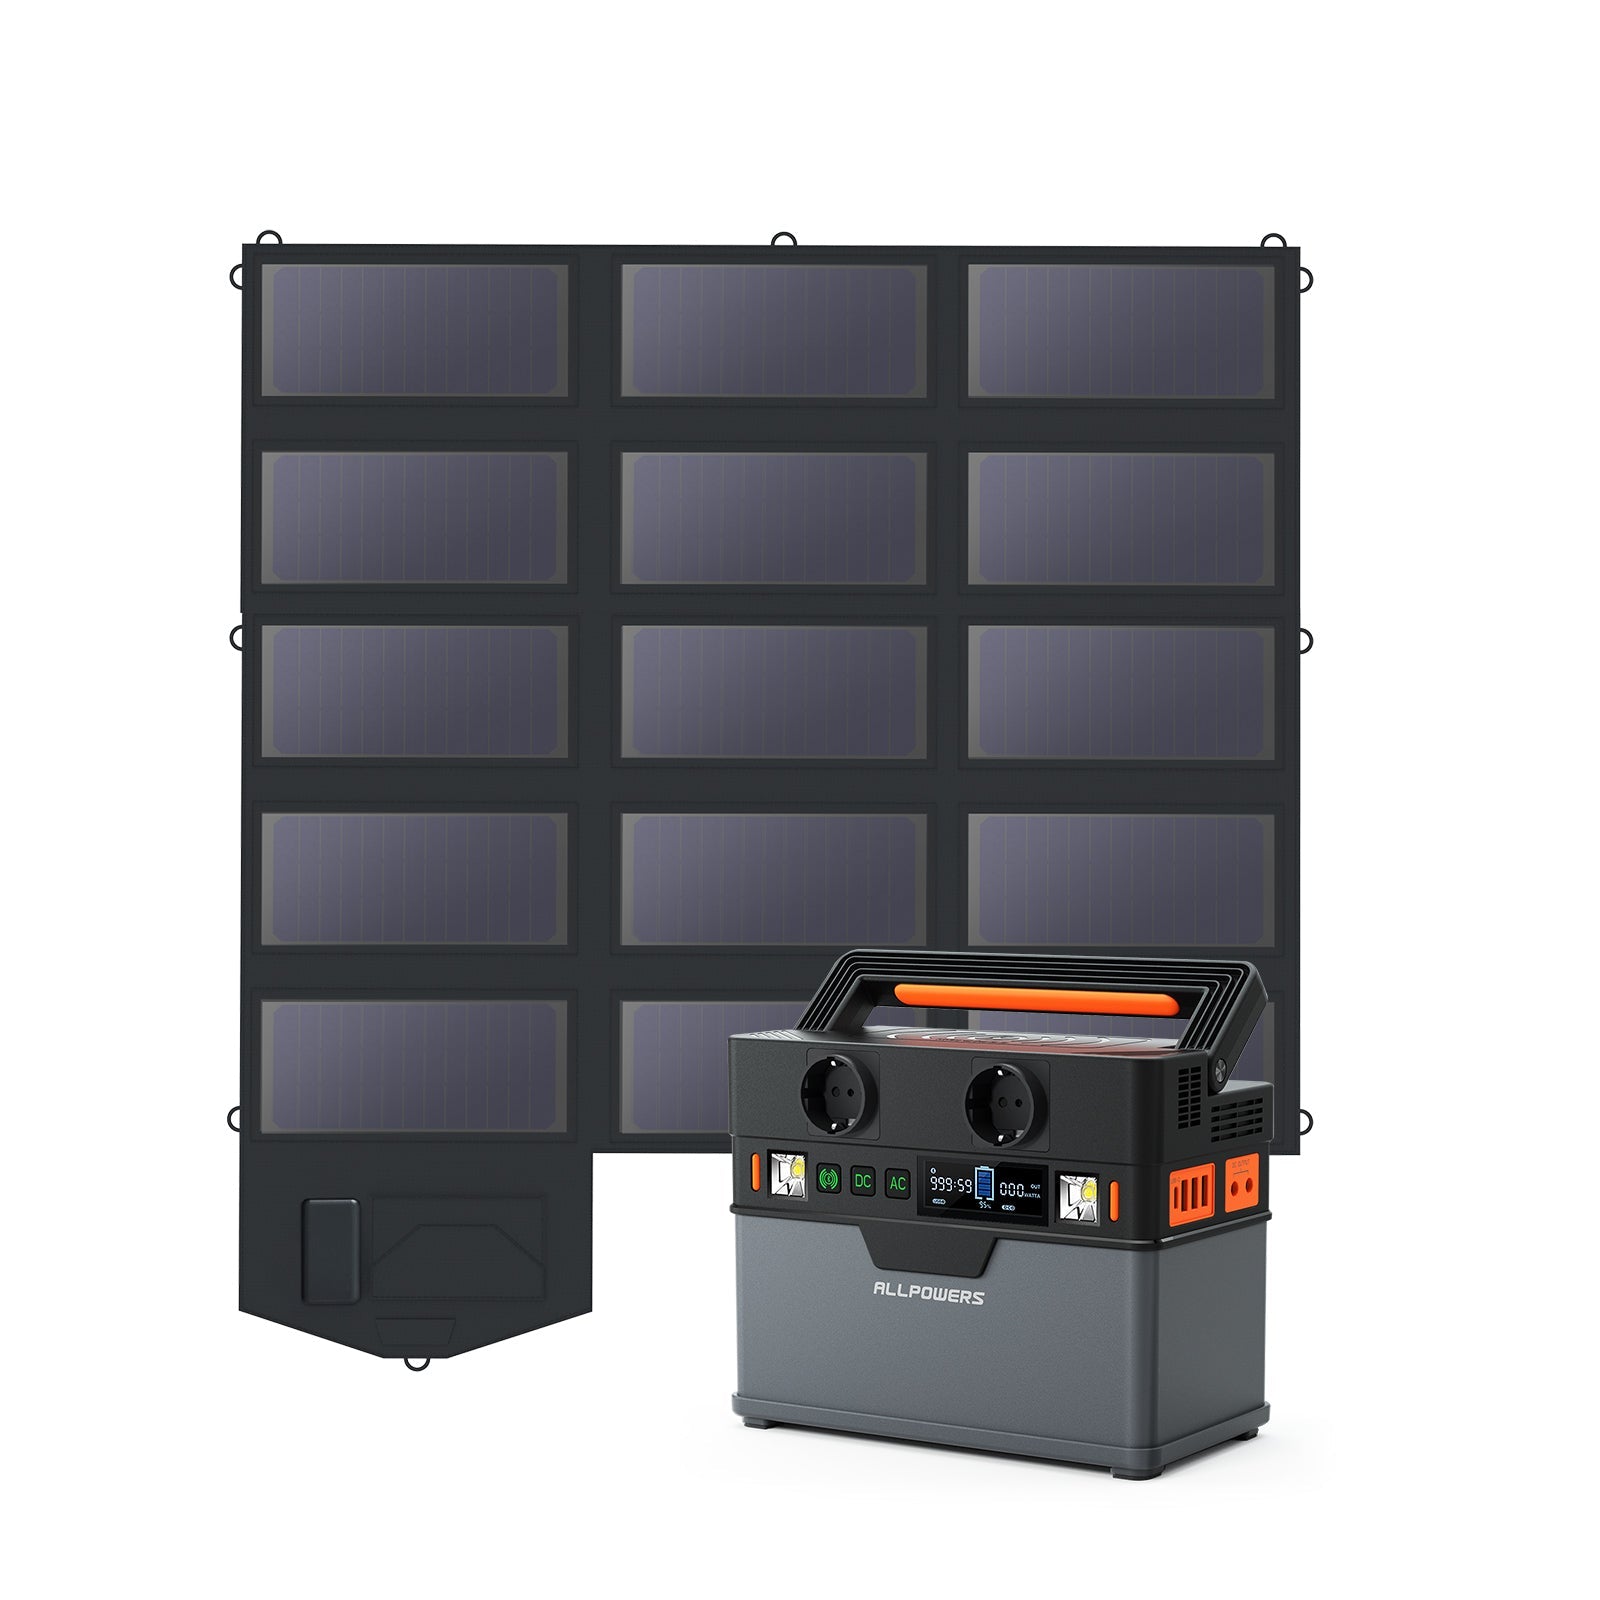 ALLPOWERS S300 Solar Generator Portable Power Station 300W 288Wh with SP012 100W Solar Panel